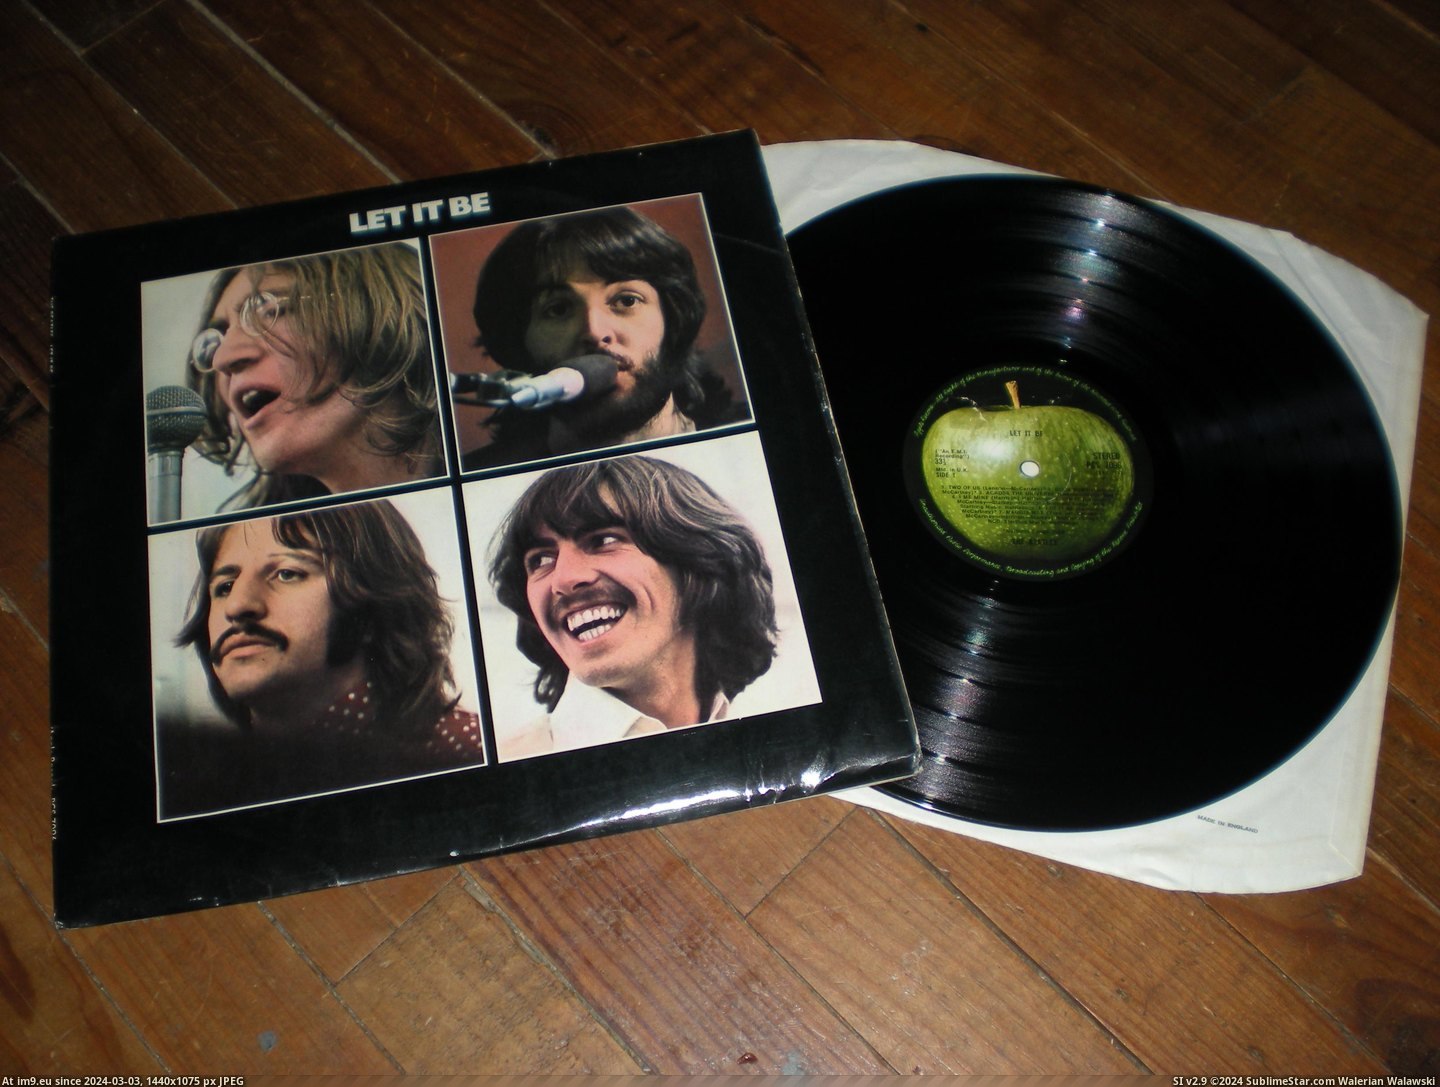  #Let  Let It Be 22-111 Pic. (Image of album new 1))